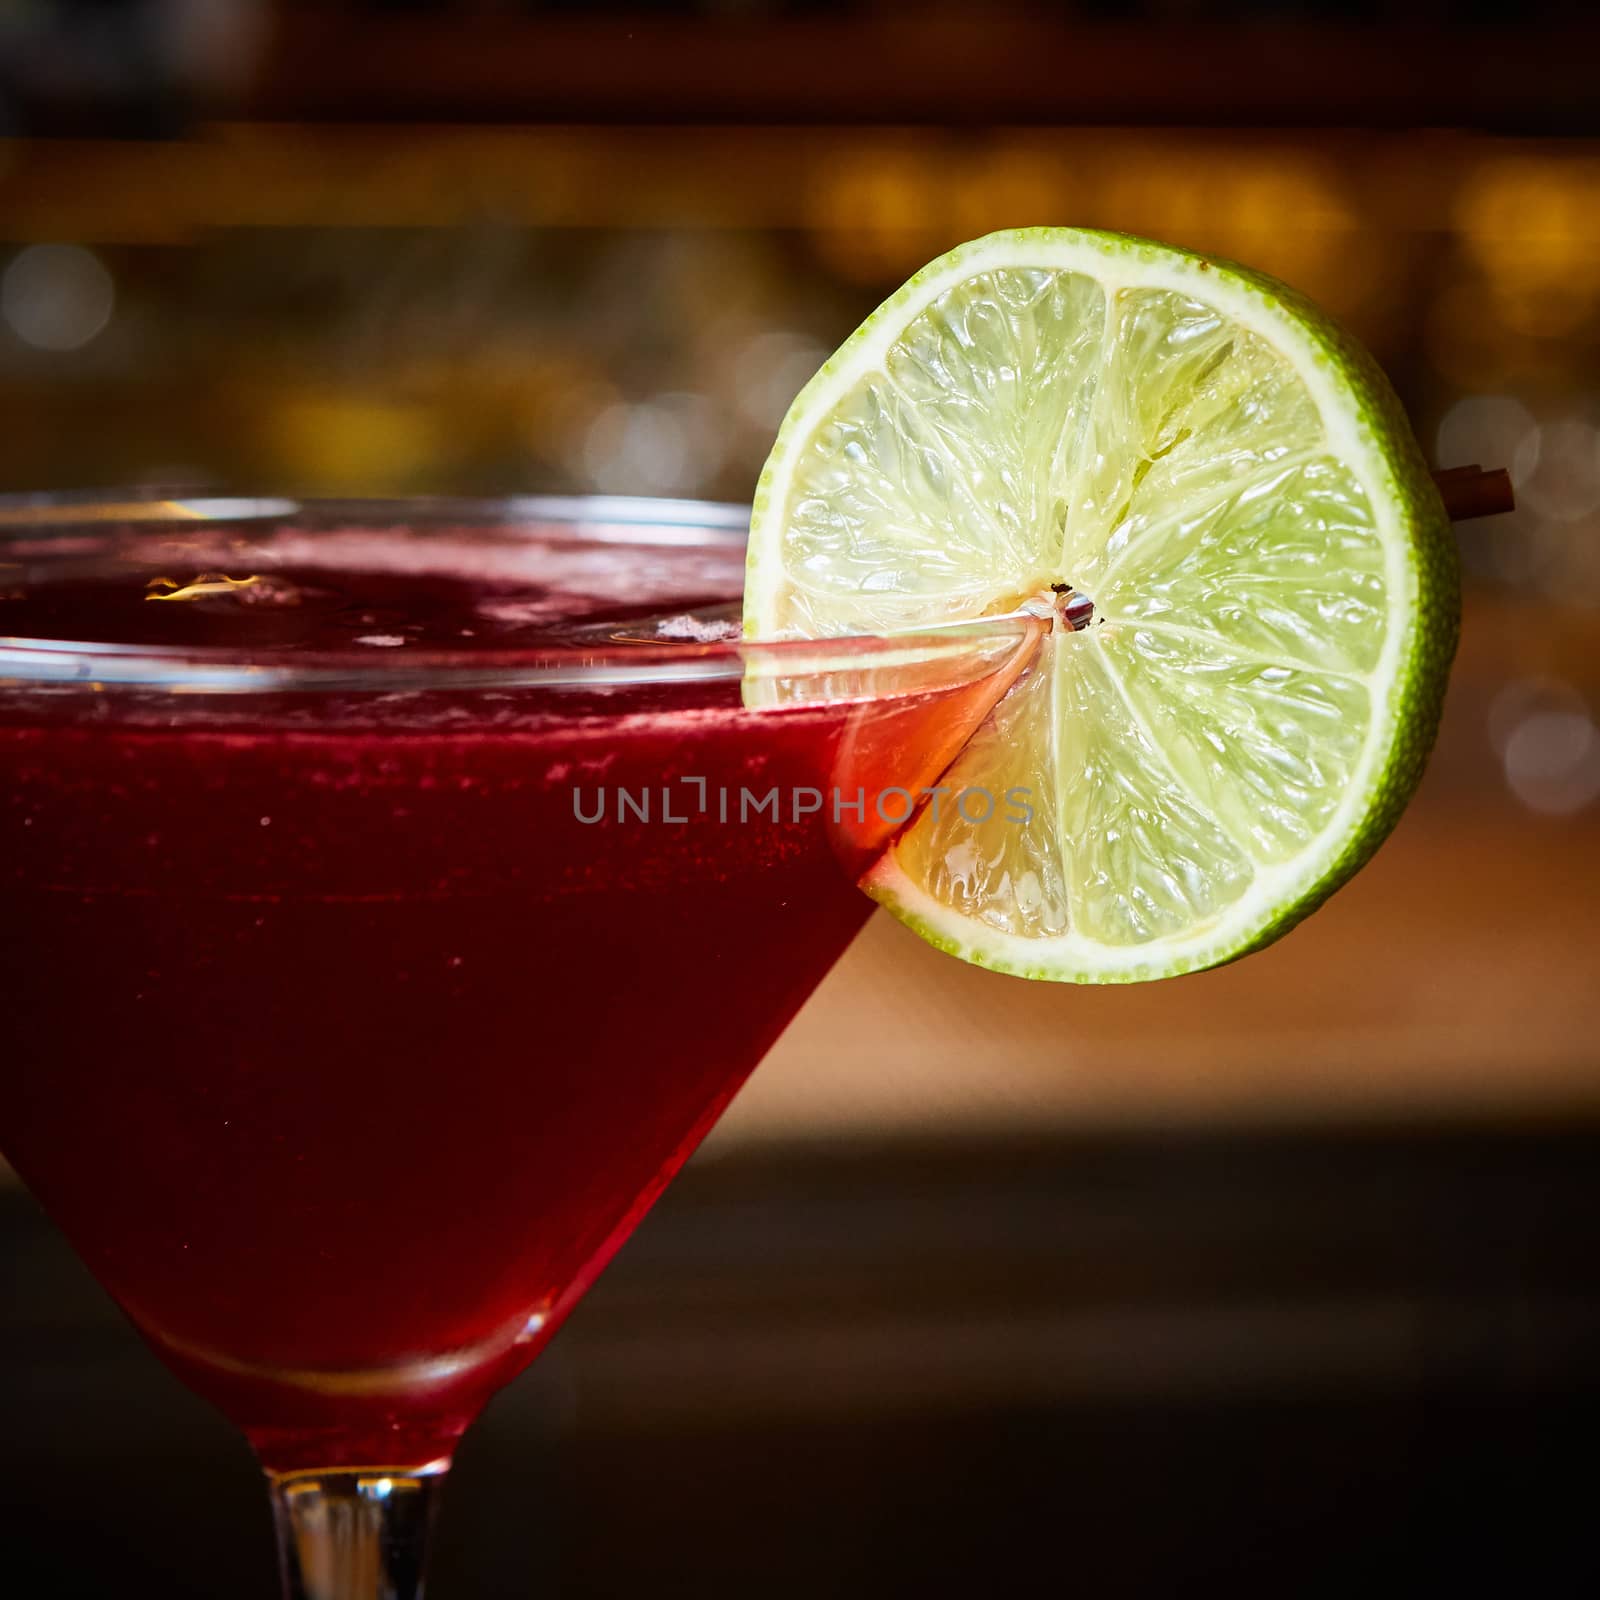 Cosmopolitan - Alcoholic Cocktail made from Vodka, Cointreau, Lime Juice and Cranberry Juice. by sarymsakov